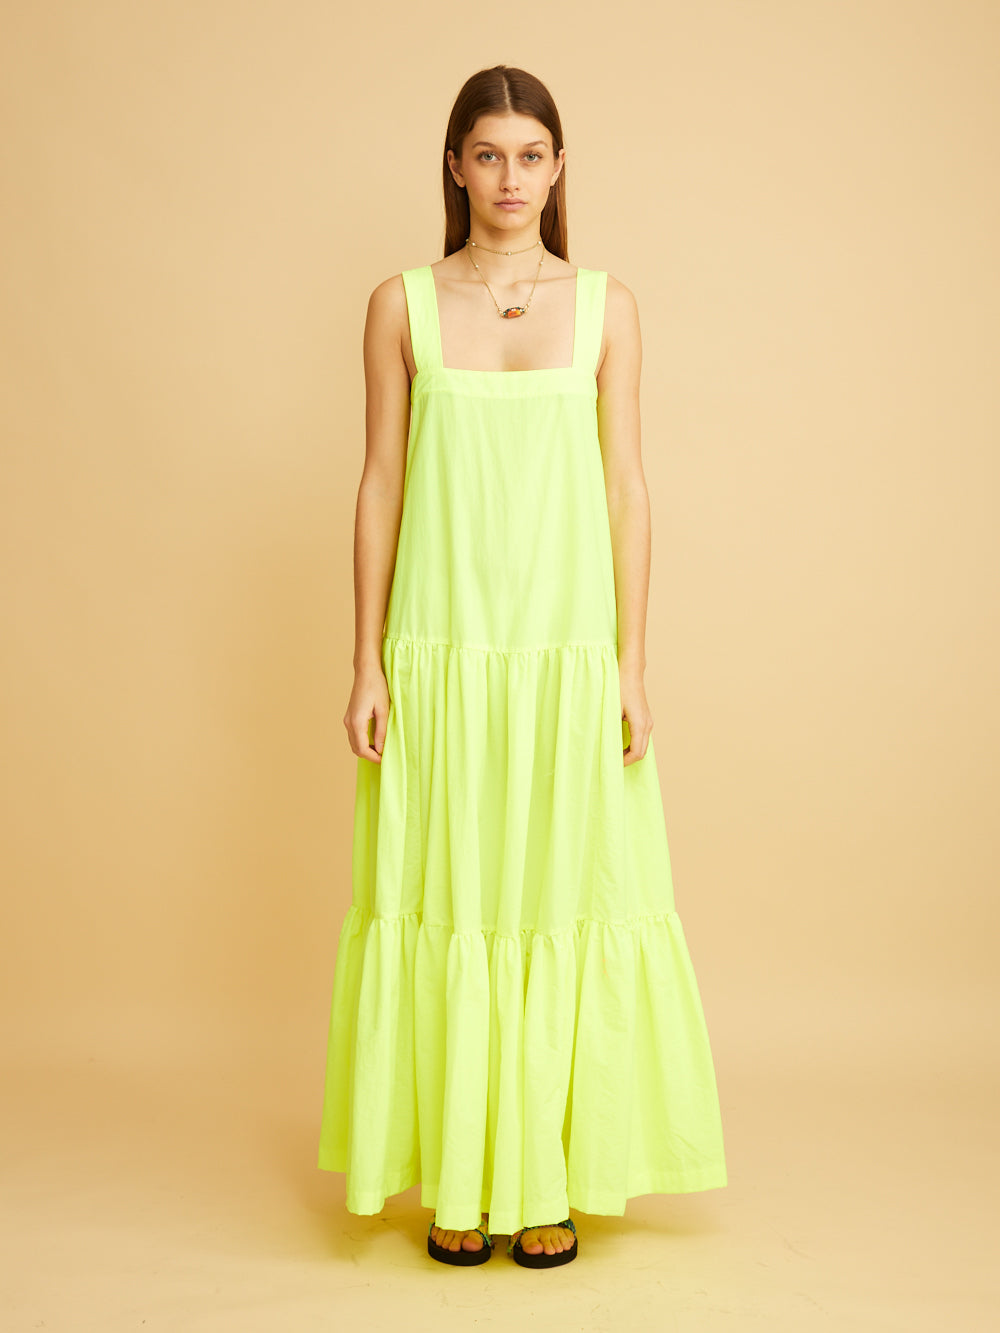 STRAPPY DRESS WITH NEON YELLOW FLOWERS